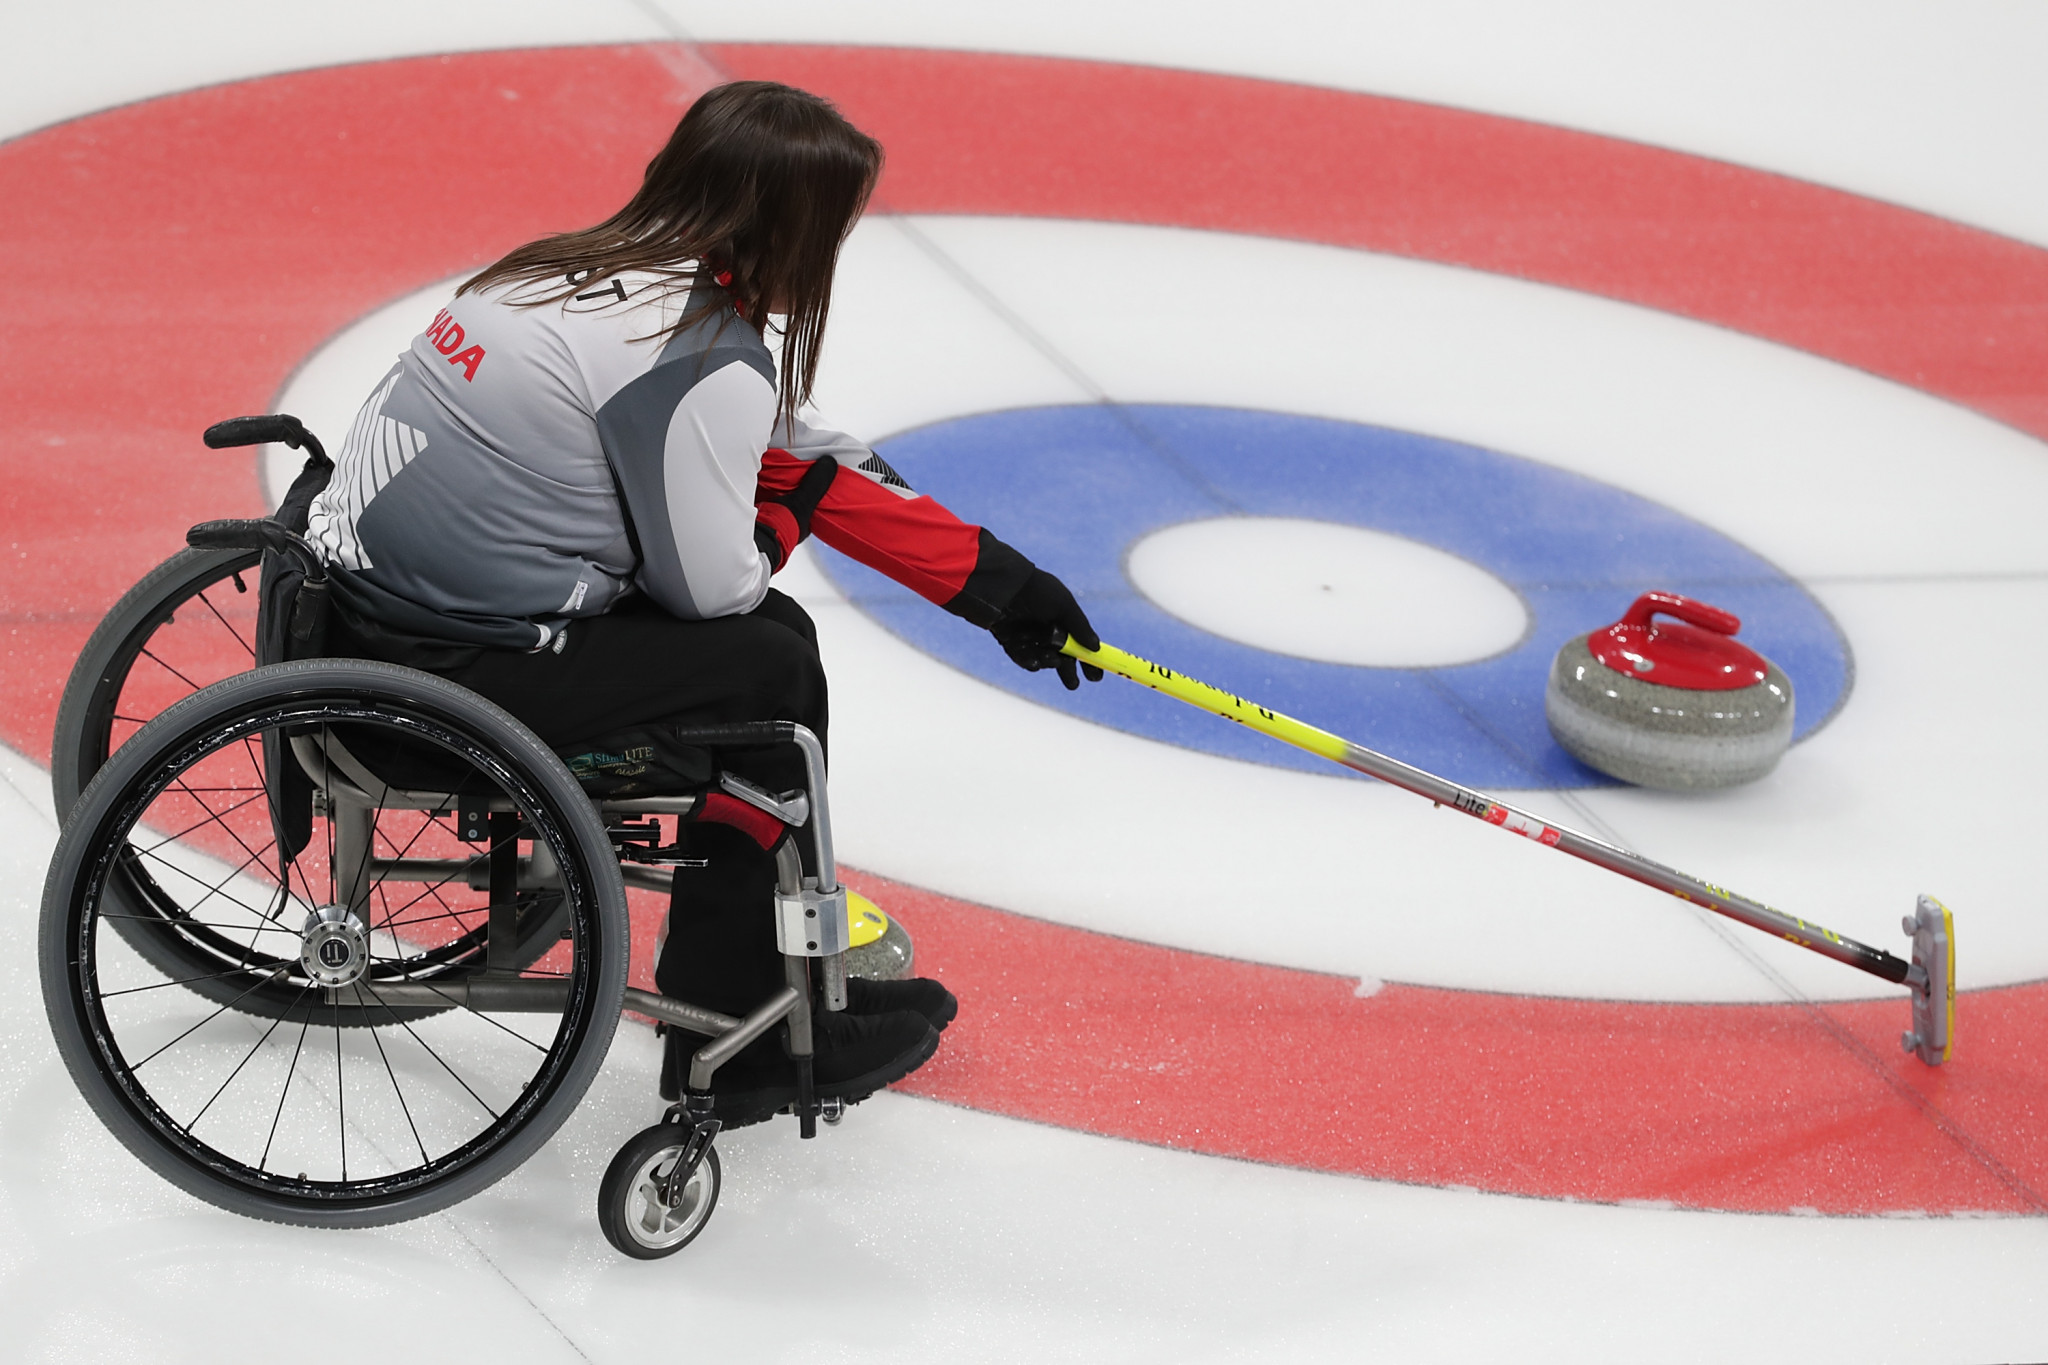 Lee Moon-tae hopes sports like wheelchair curling can become commercially successful in South Korea following the Winter Paralympics ©Getty Images